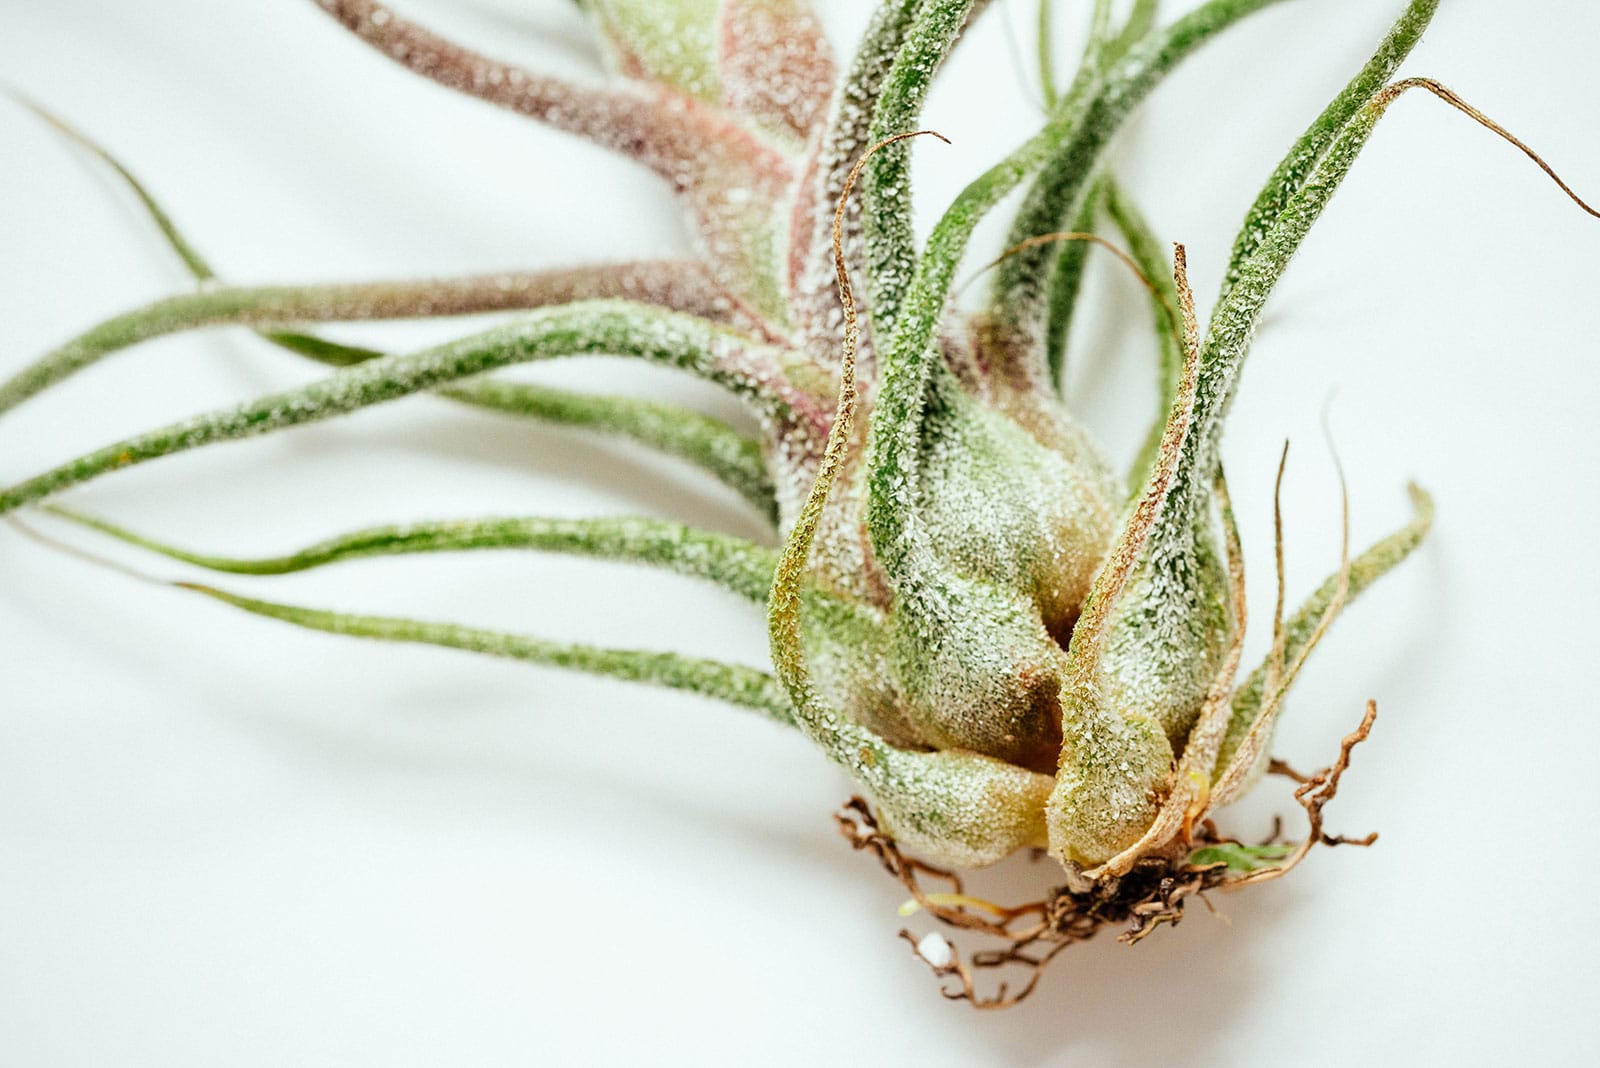 Closeup of trichomes on a fuzzy Tillandsia pruinosa plant set on a white background